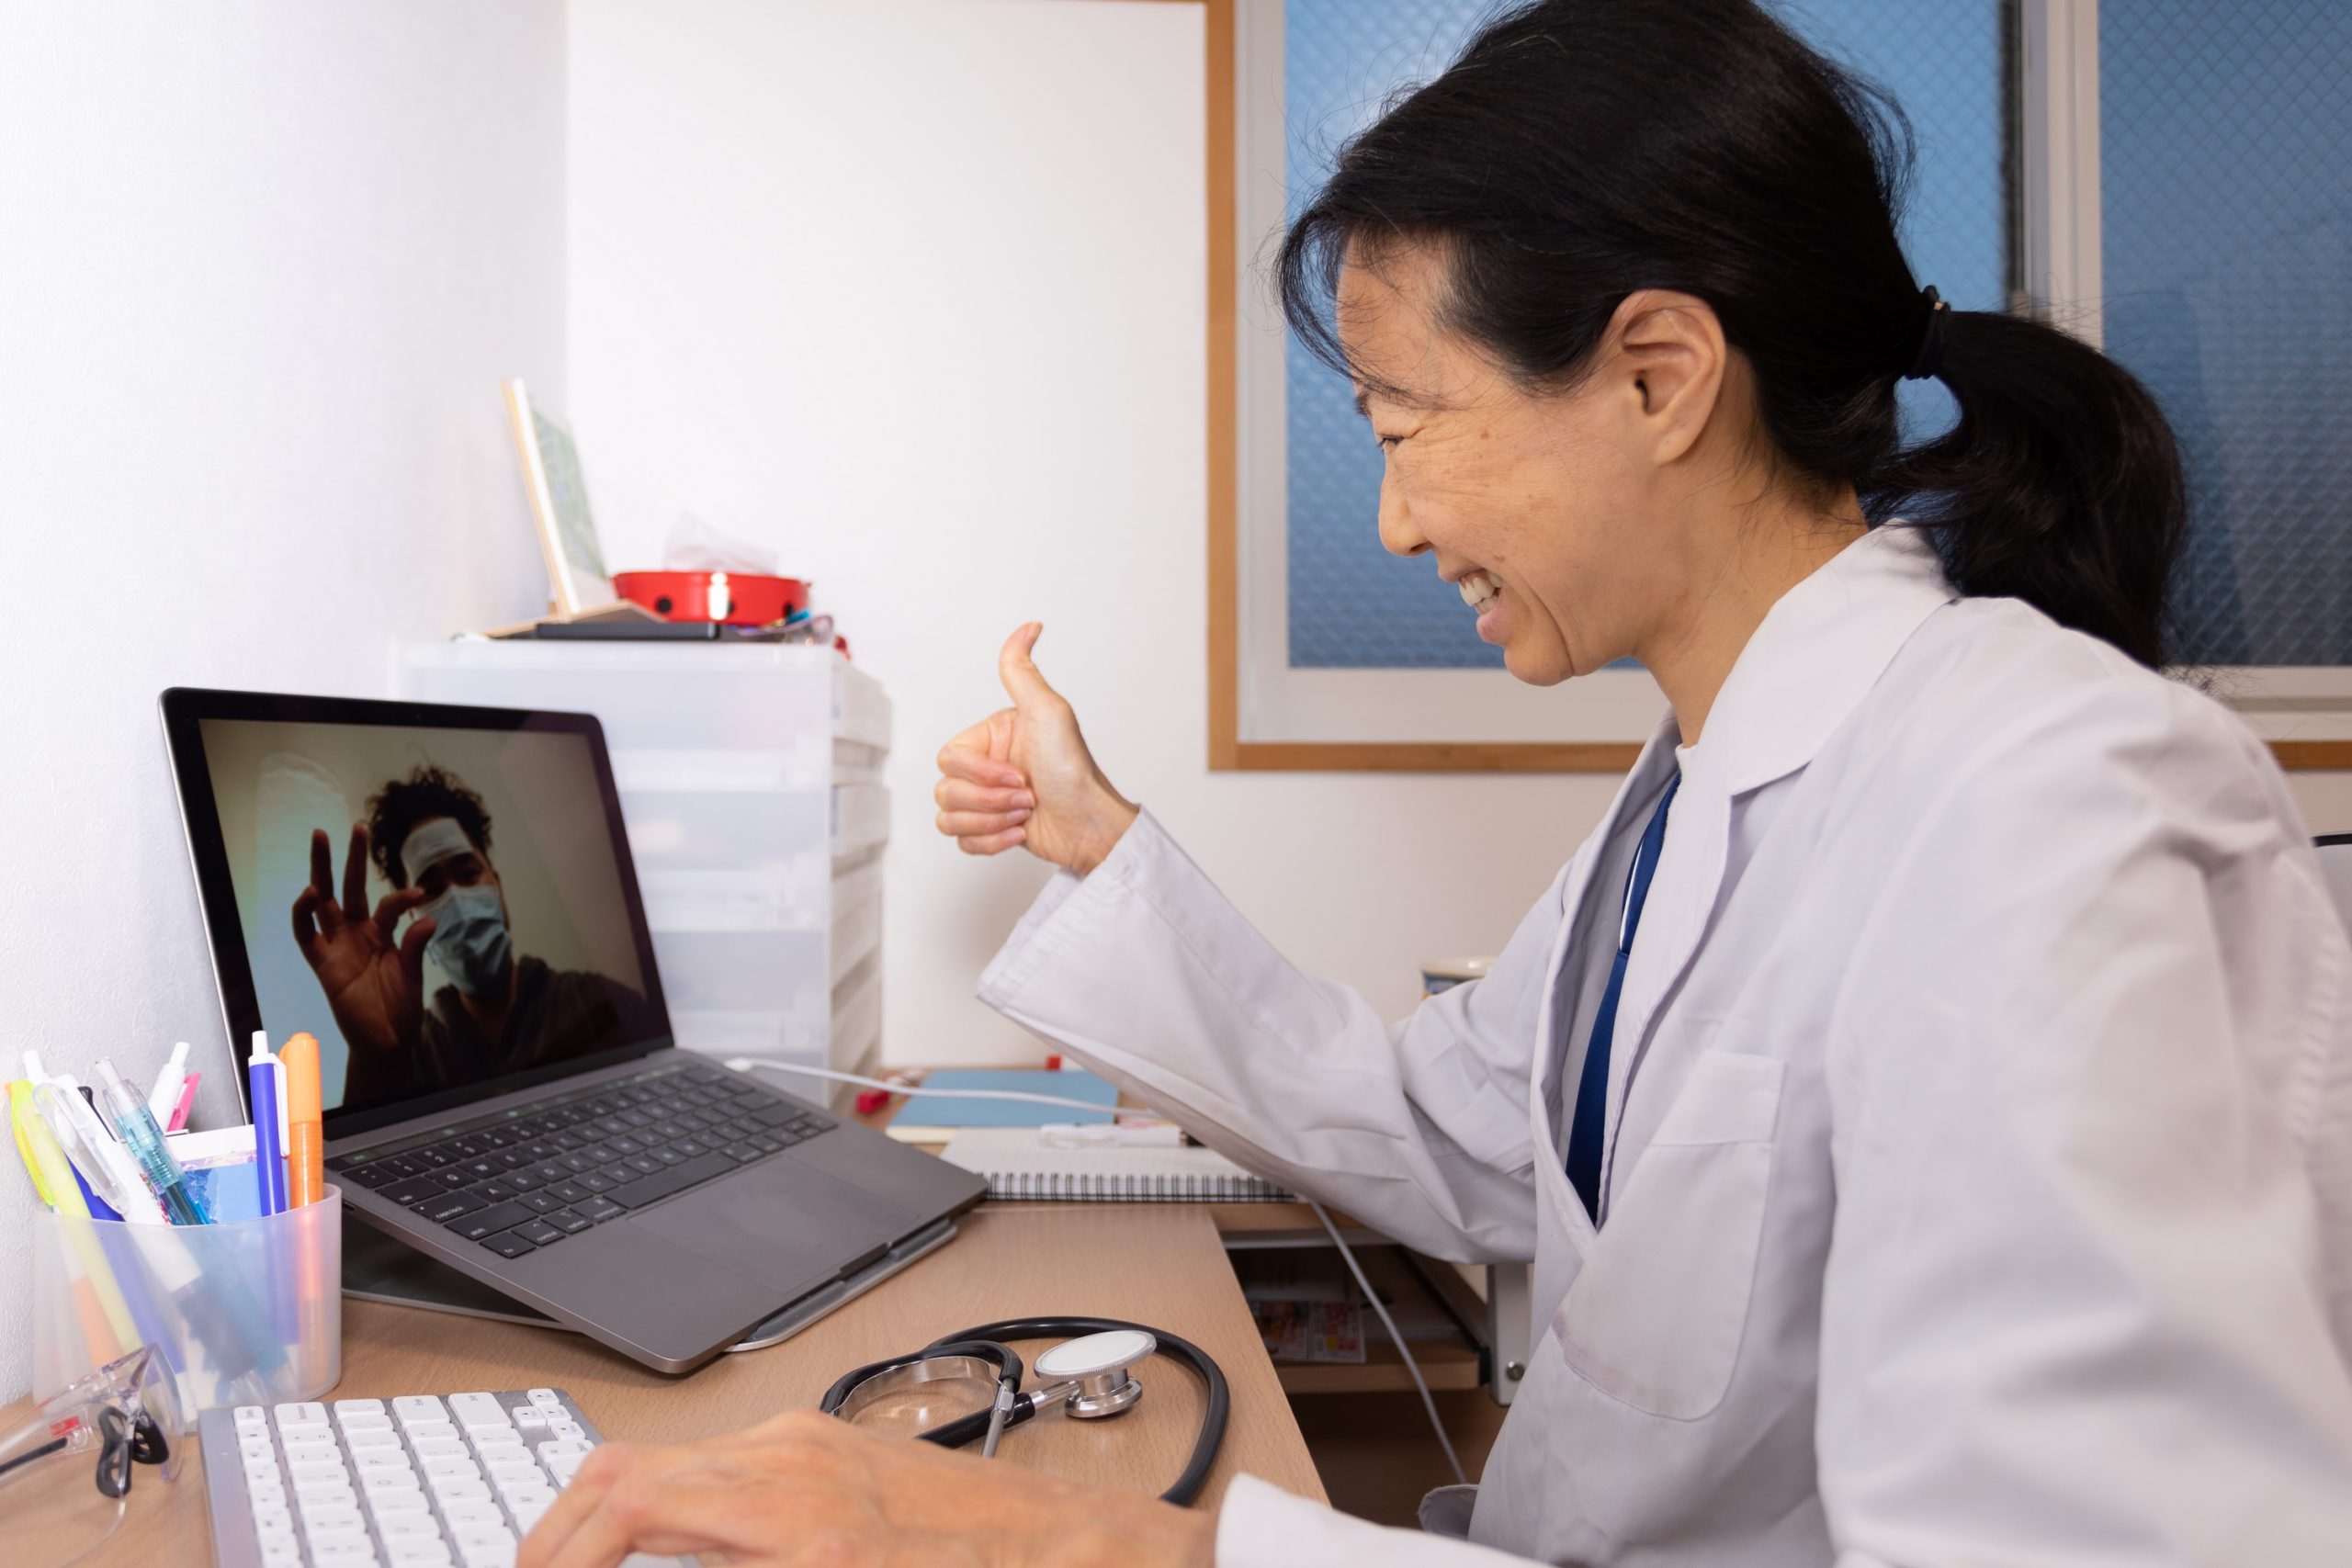 Photo of a smiling woman wearing a white medical coat and sitting in front of a computer, giving a thumbs-up.